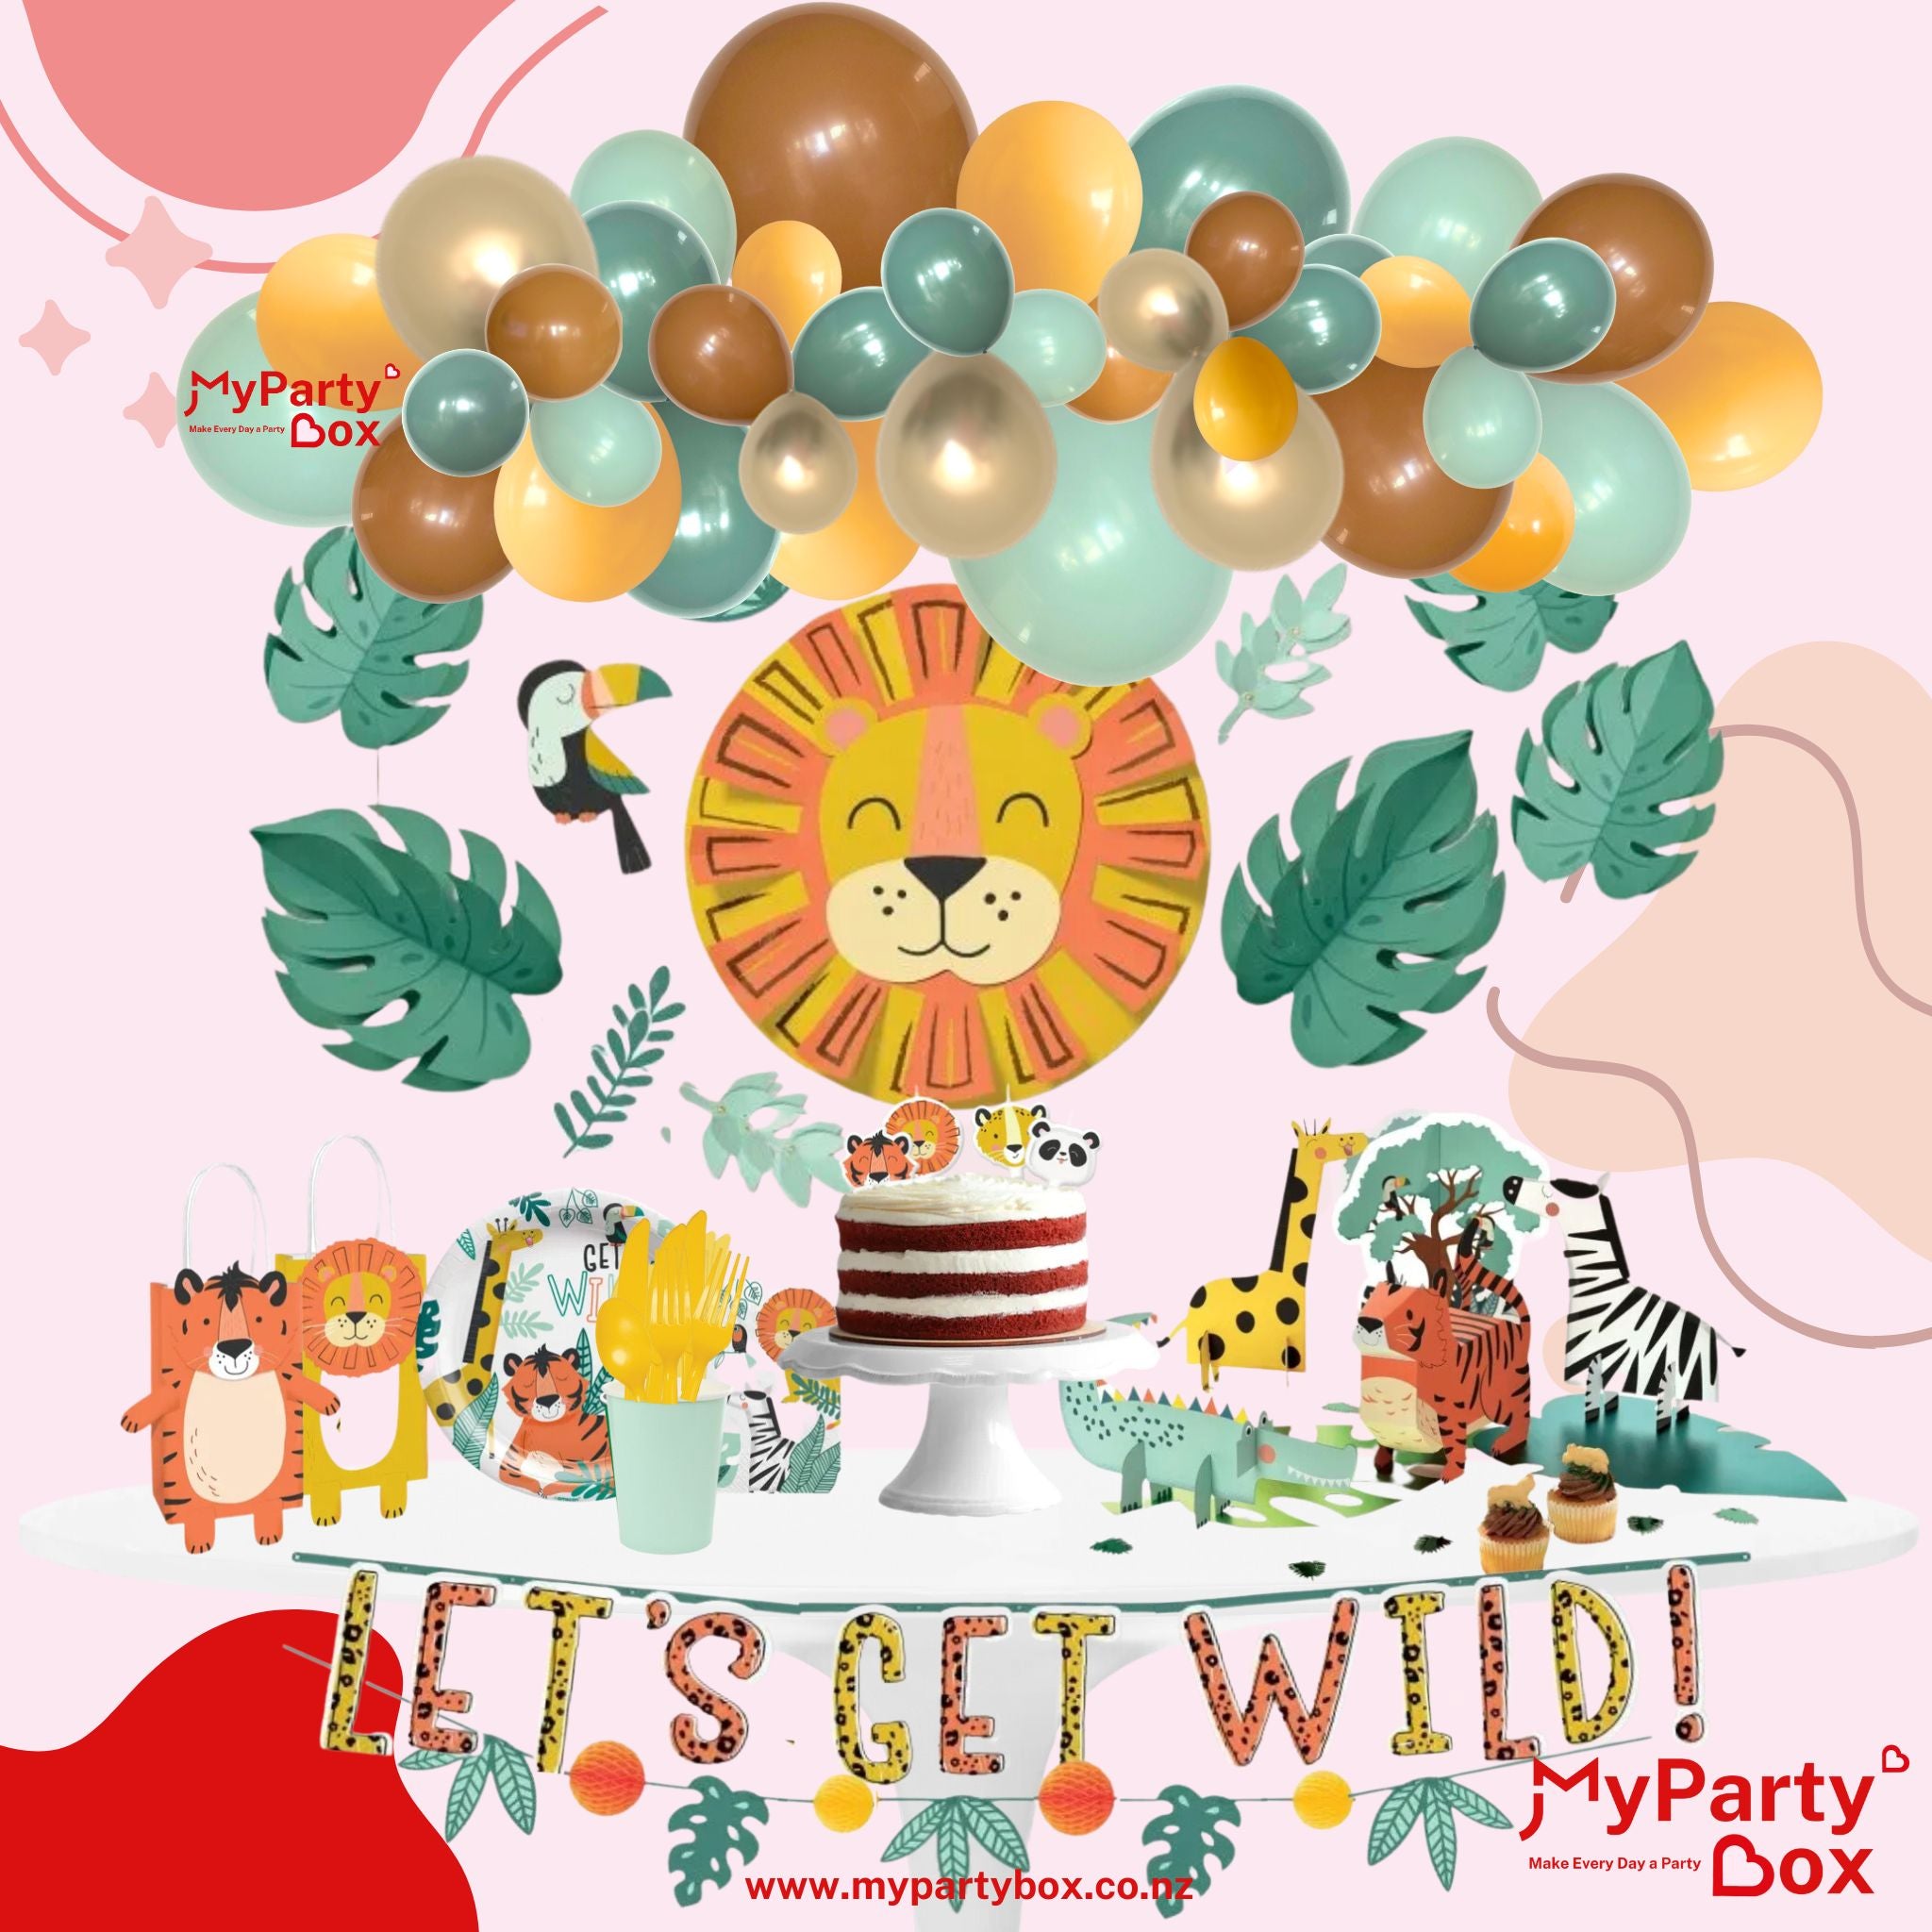 My Party Box Get Wild Jungle Party Box with Assorted Jungle theme partywares and balloon garland